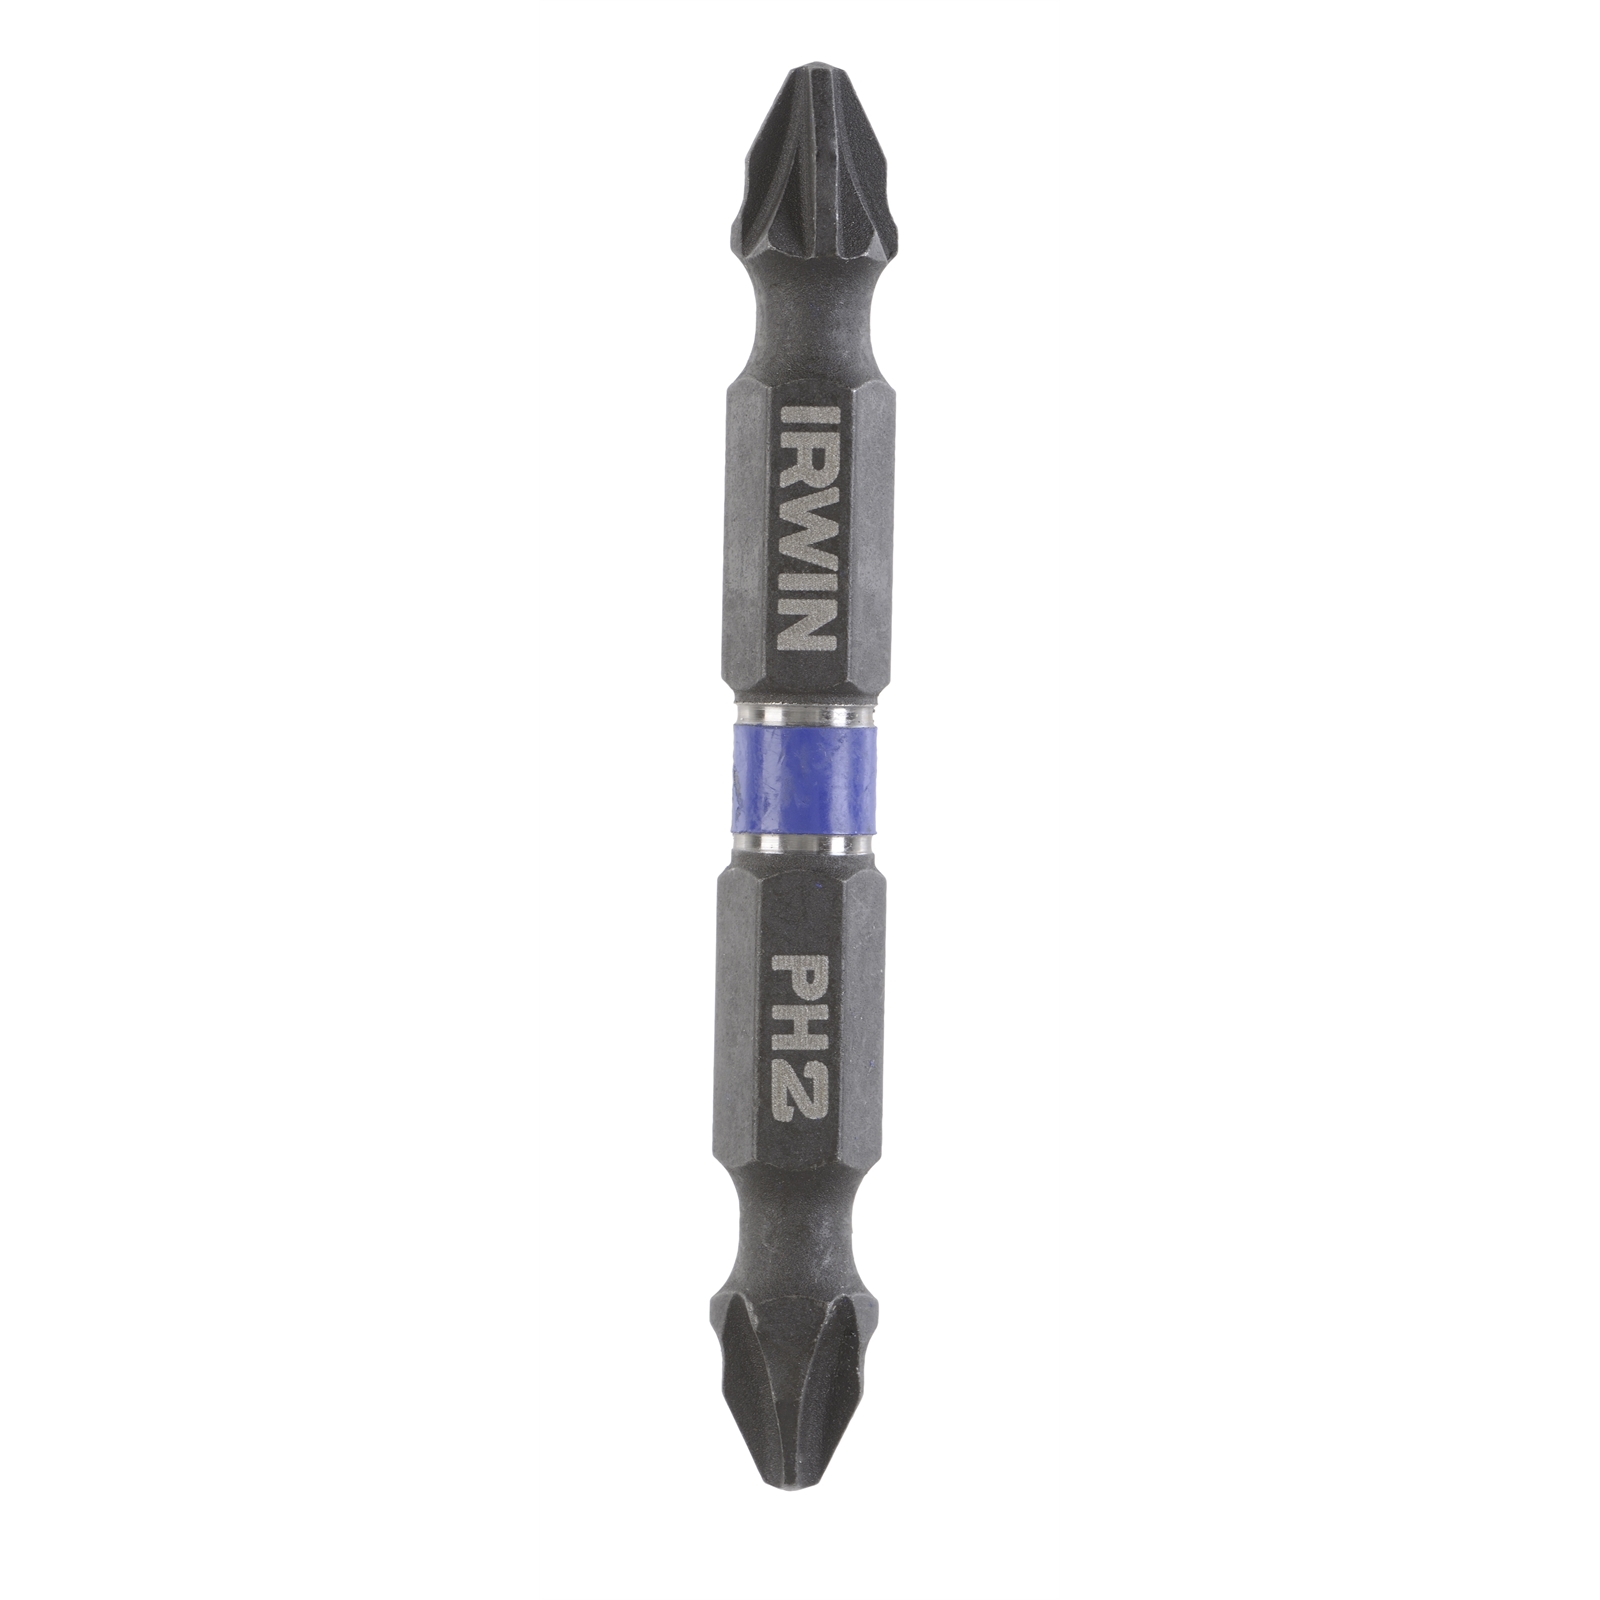 Irwin 60mm Impact Double Ended Screwdriver Bit